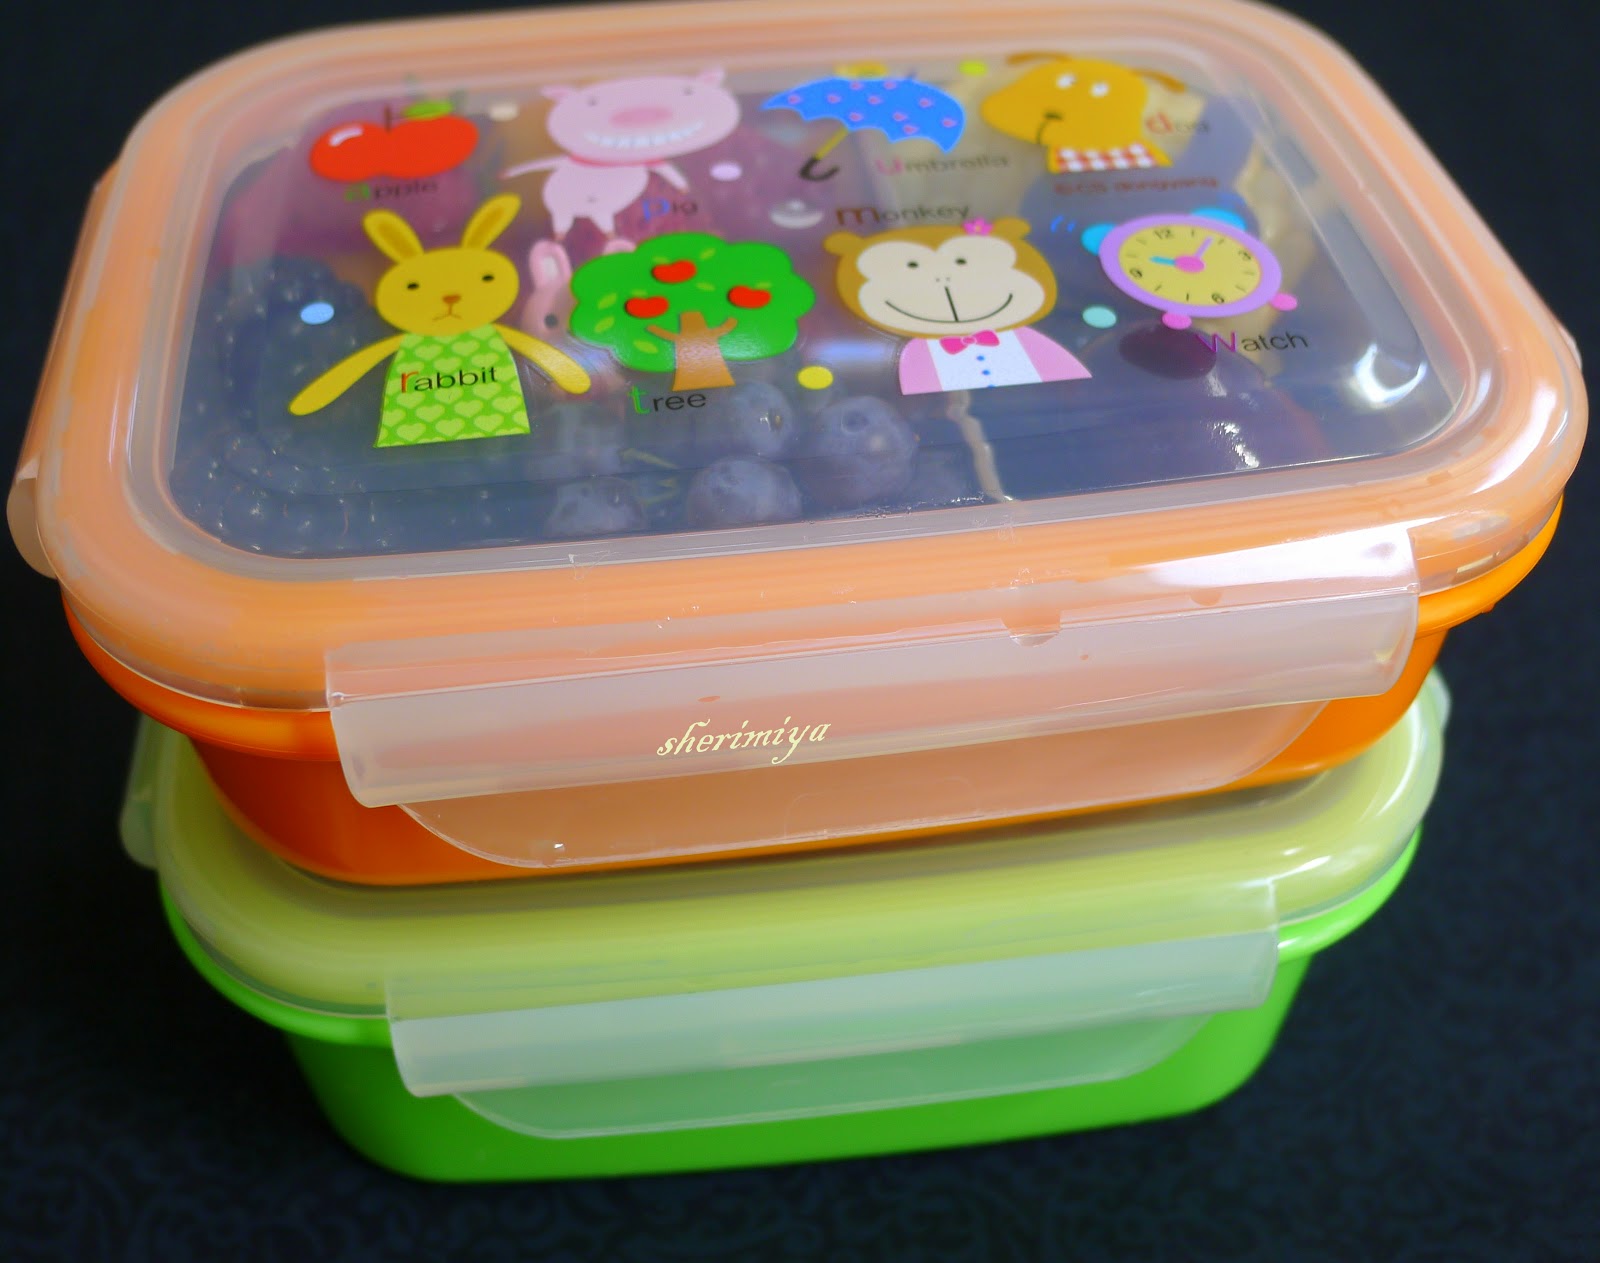 We test Daiso's new storage container to see if it keeps rice fluffy even  after freezing